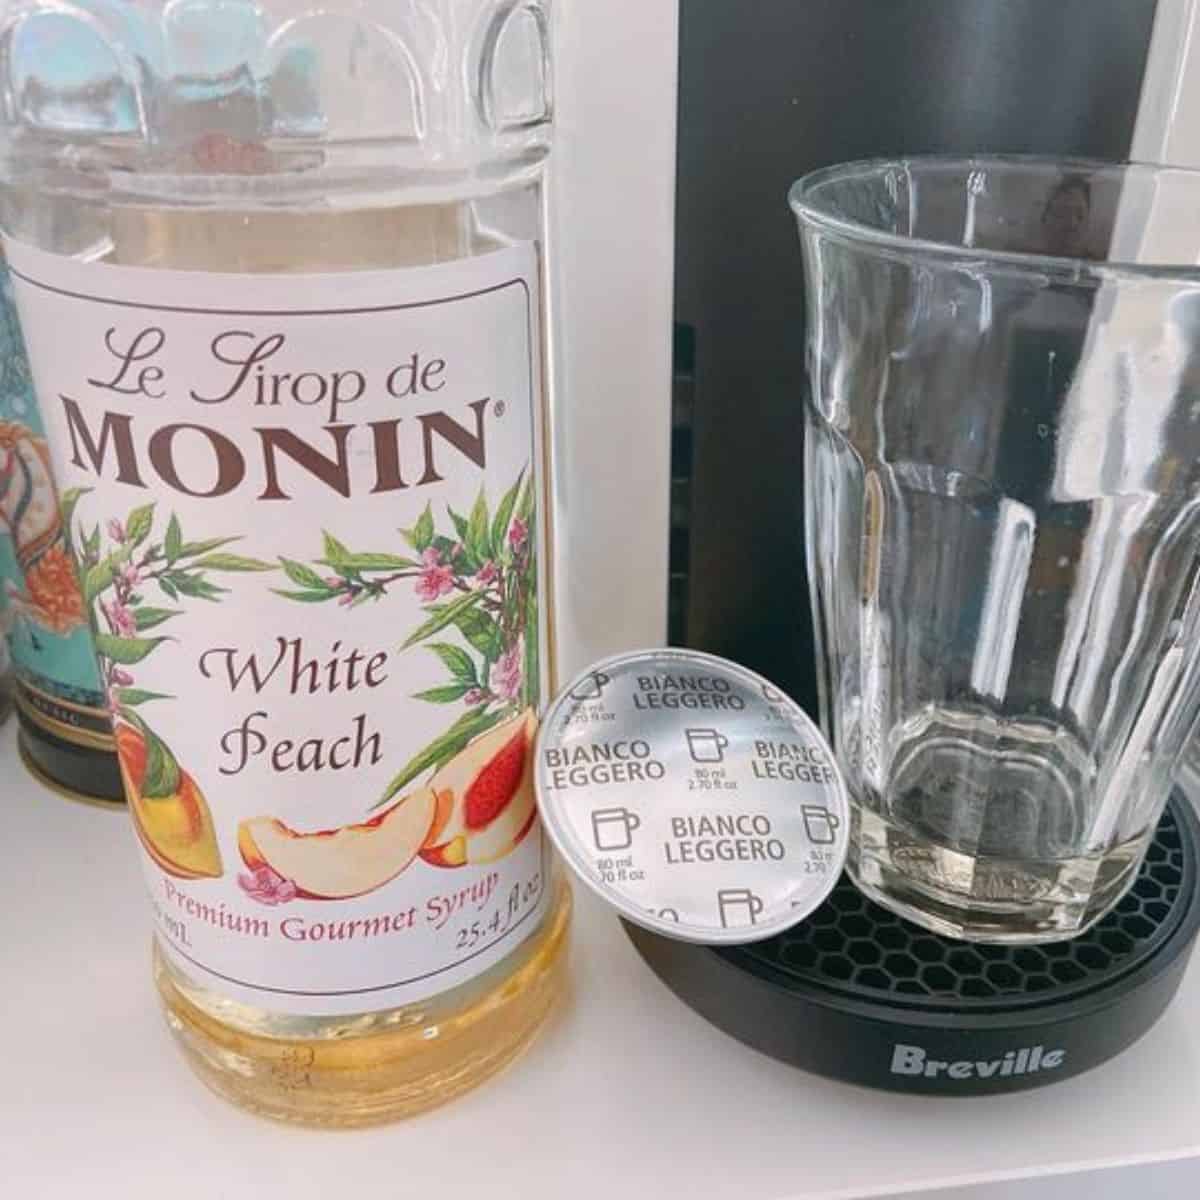 A transparent bottle of Monin white peach syrup and an empty glass